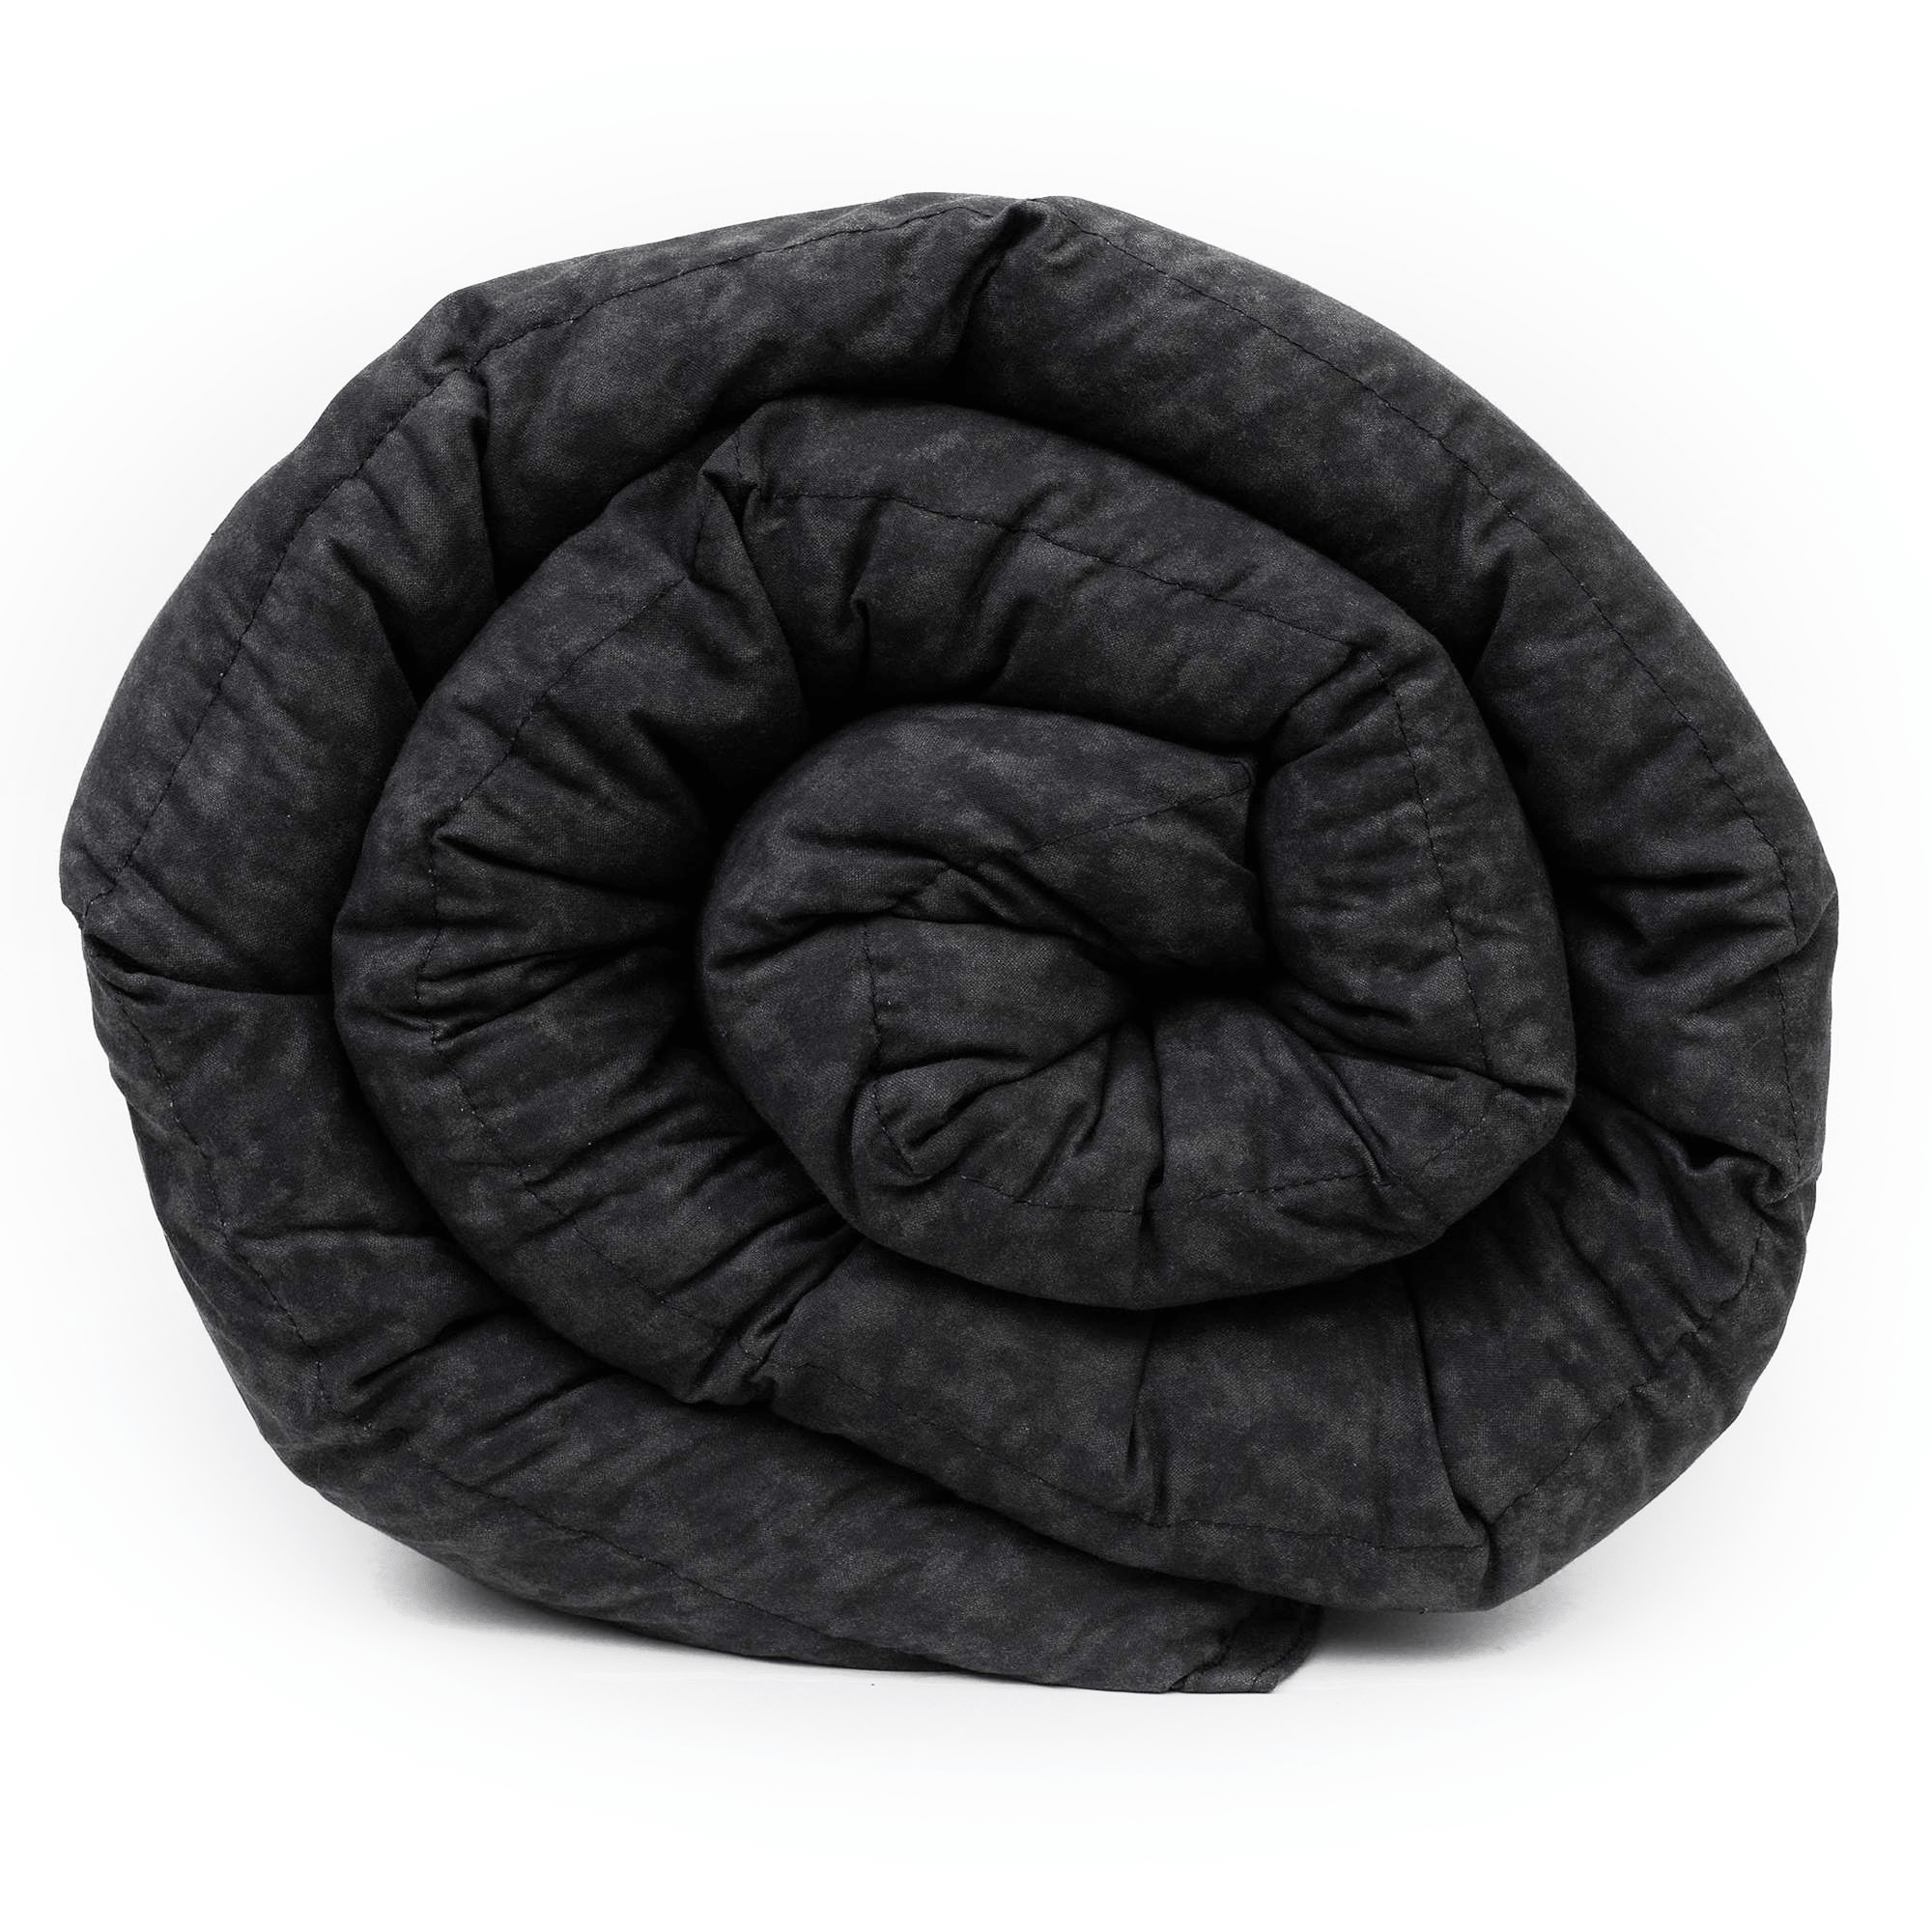 Twin Black Cotton Weighted Blanket Rolled Side View